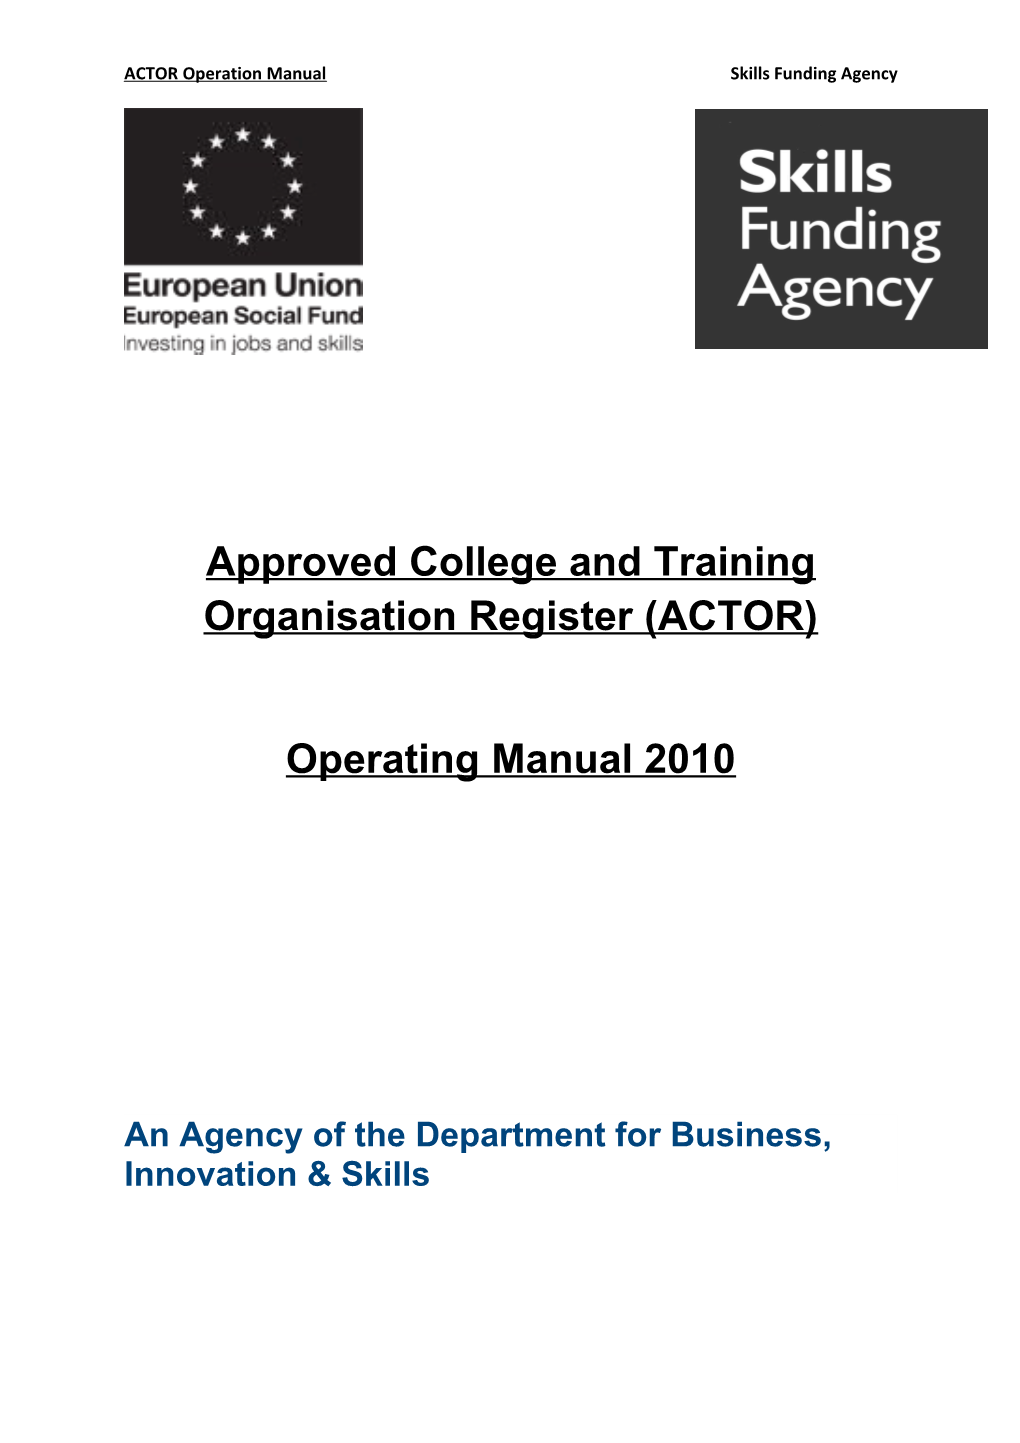 (NB We Need to Put the Skills Funding Agency Logo on This Front Page Together with The